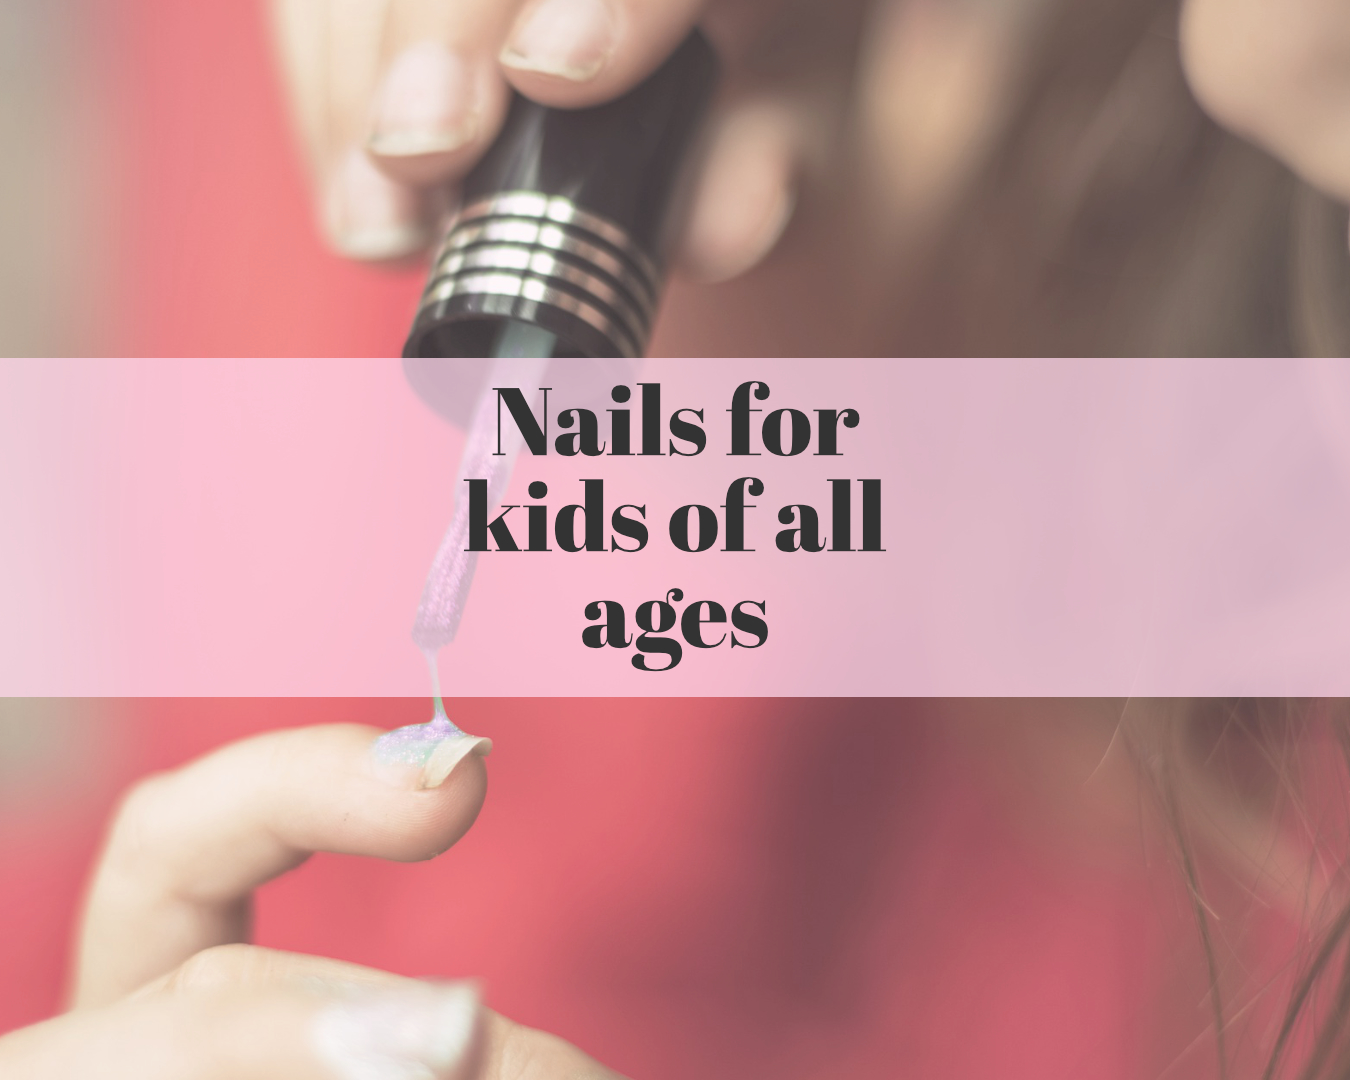 Nails for kids of all ages